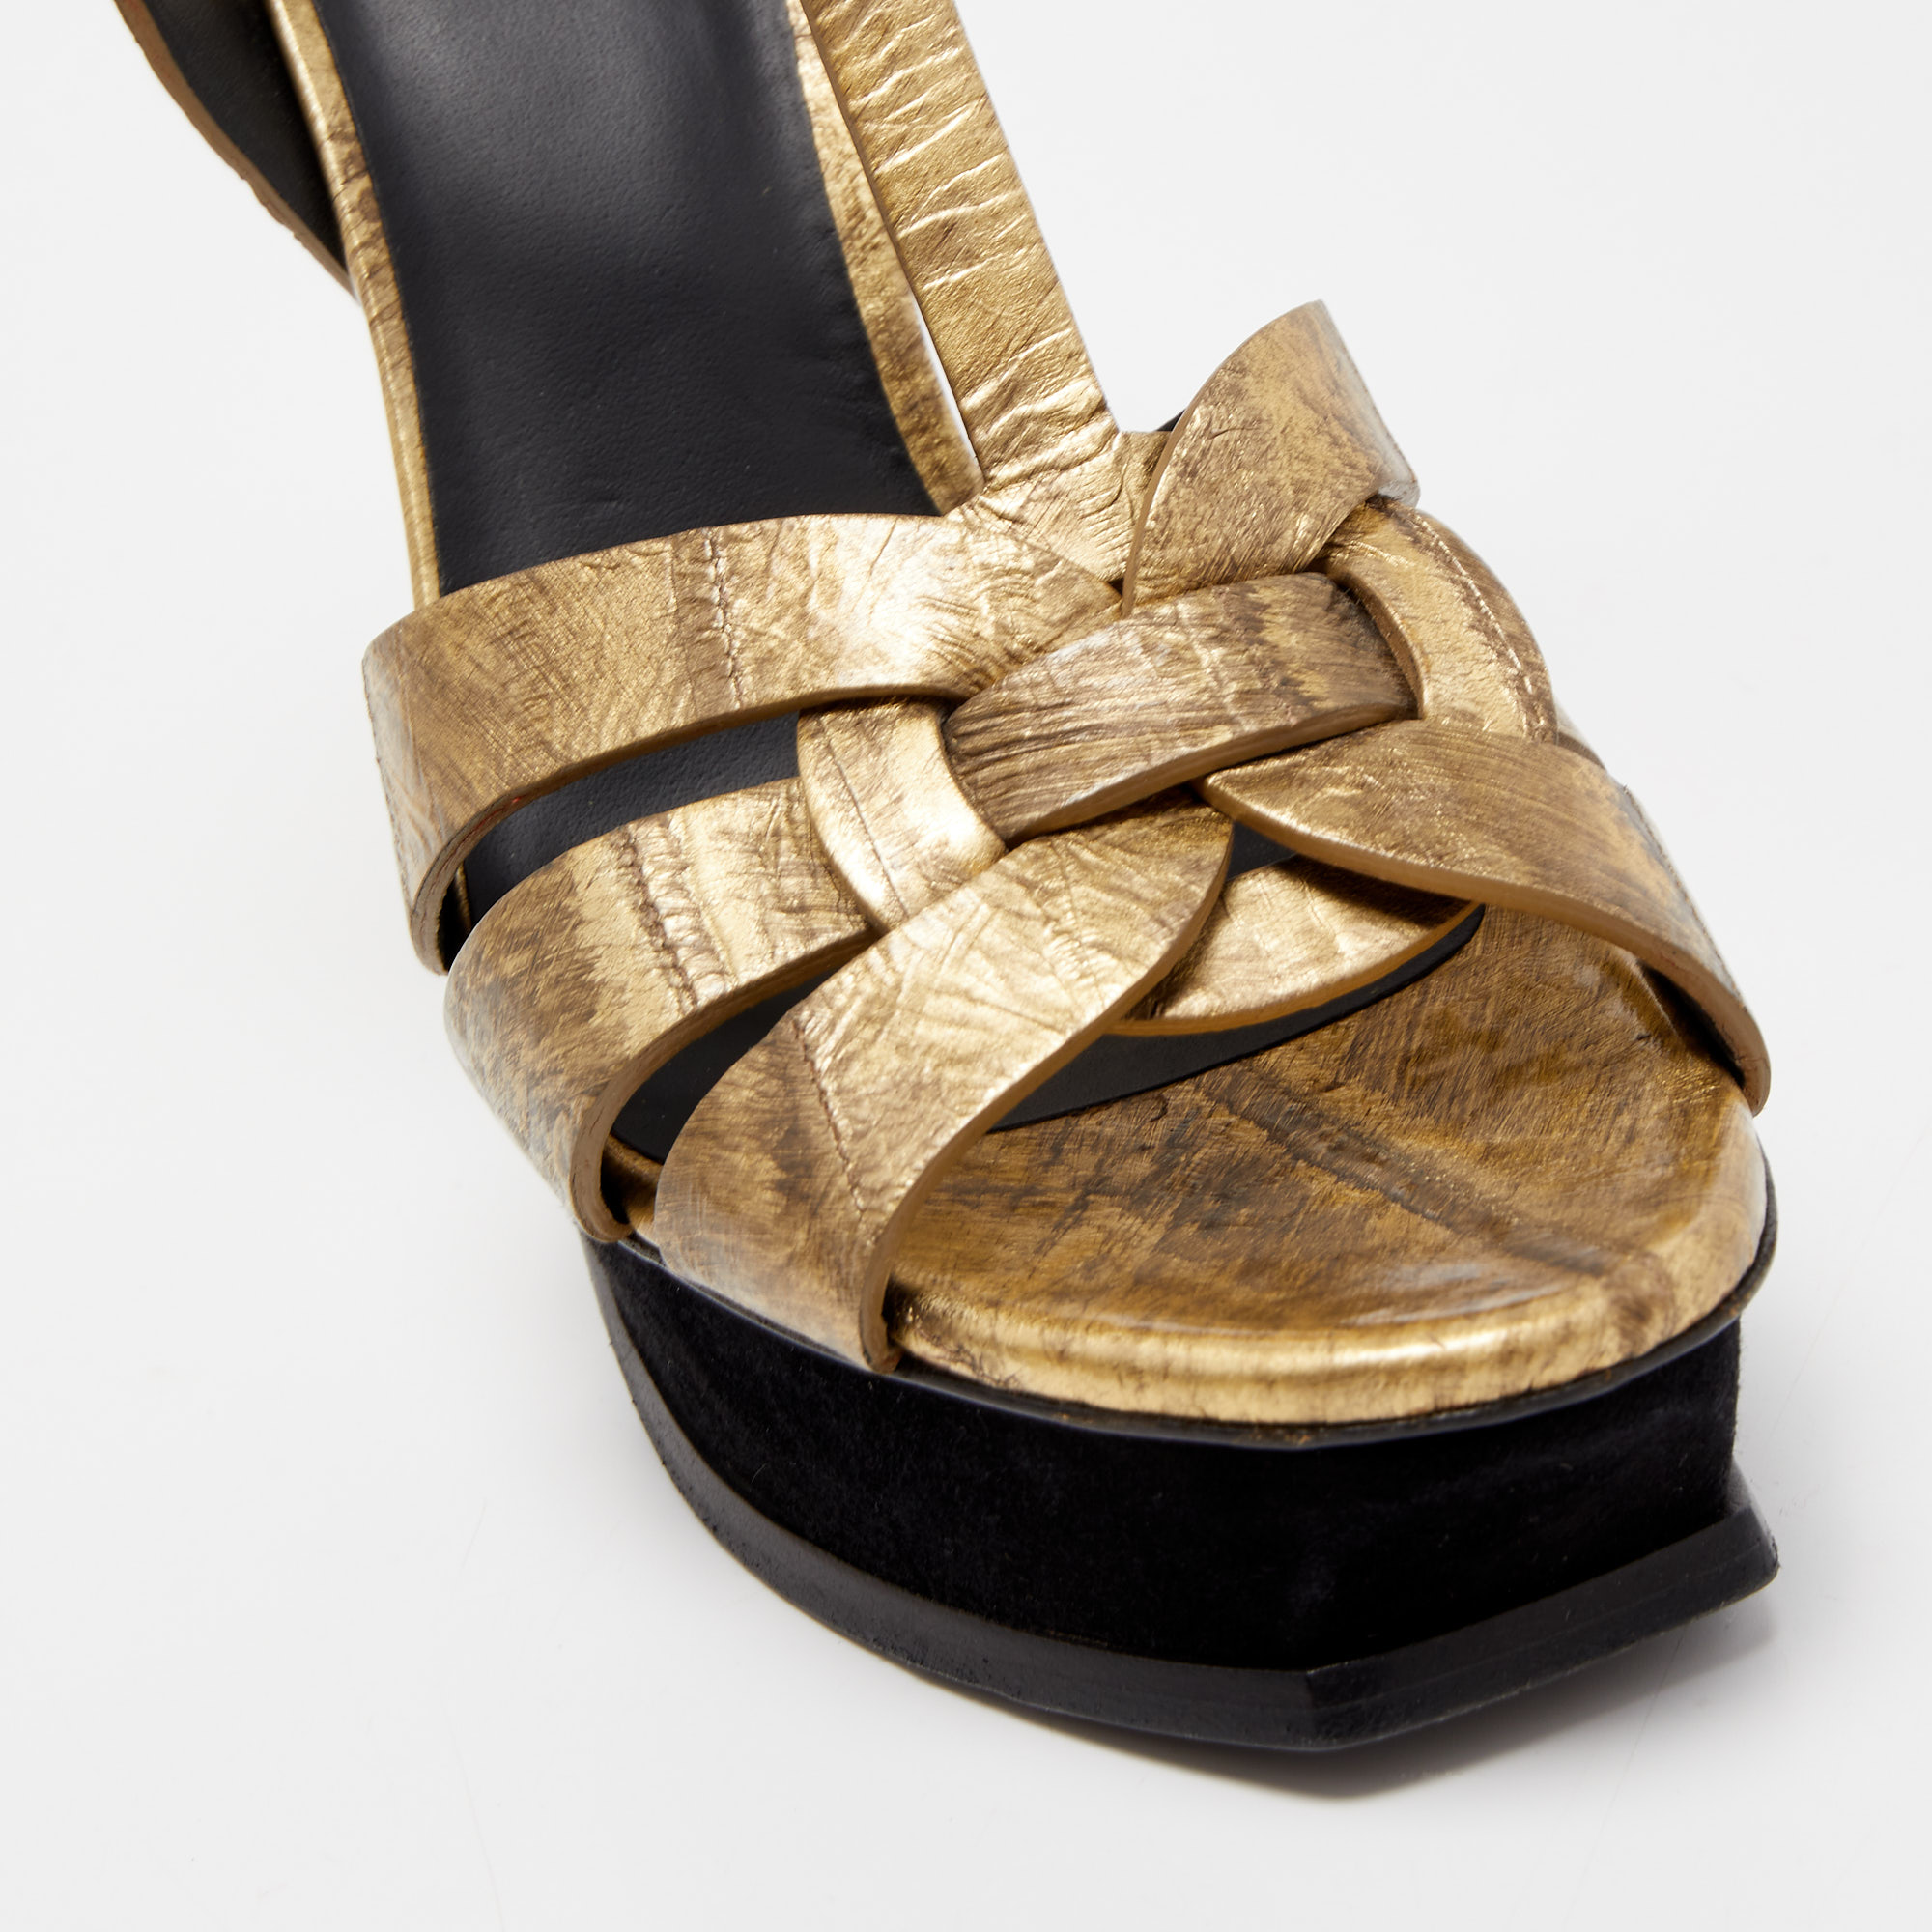 Saint Laurent Gold/Black Suede And Eel Leather Tribute Sandals Size 39.5